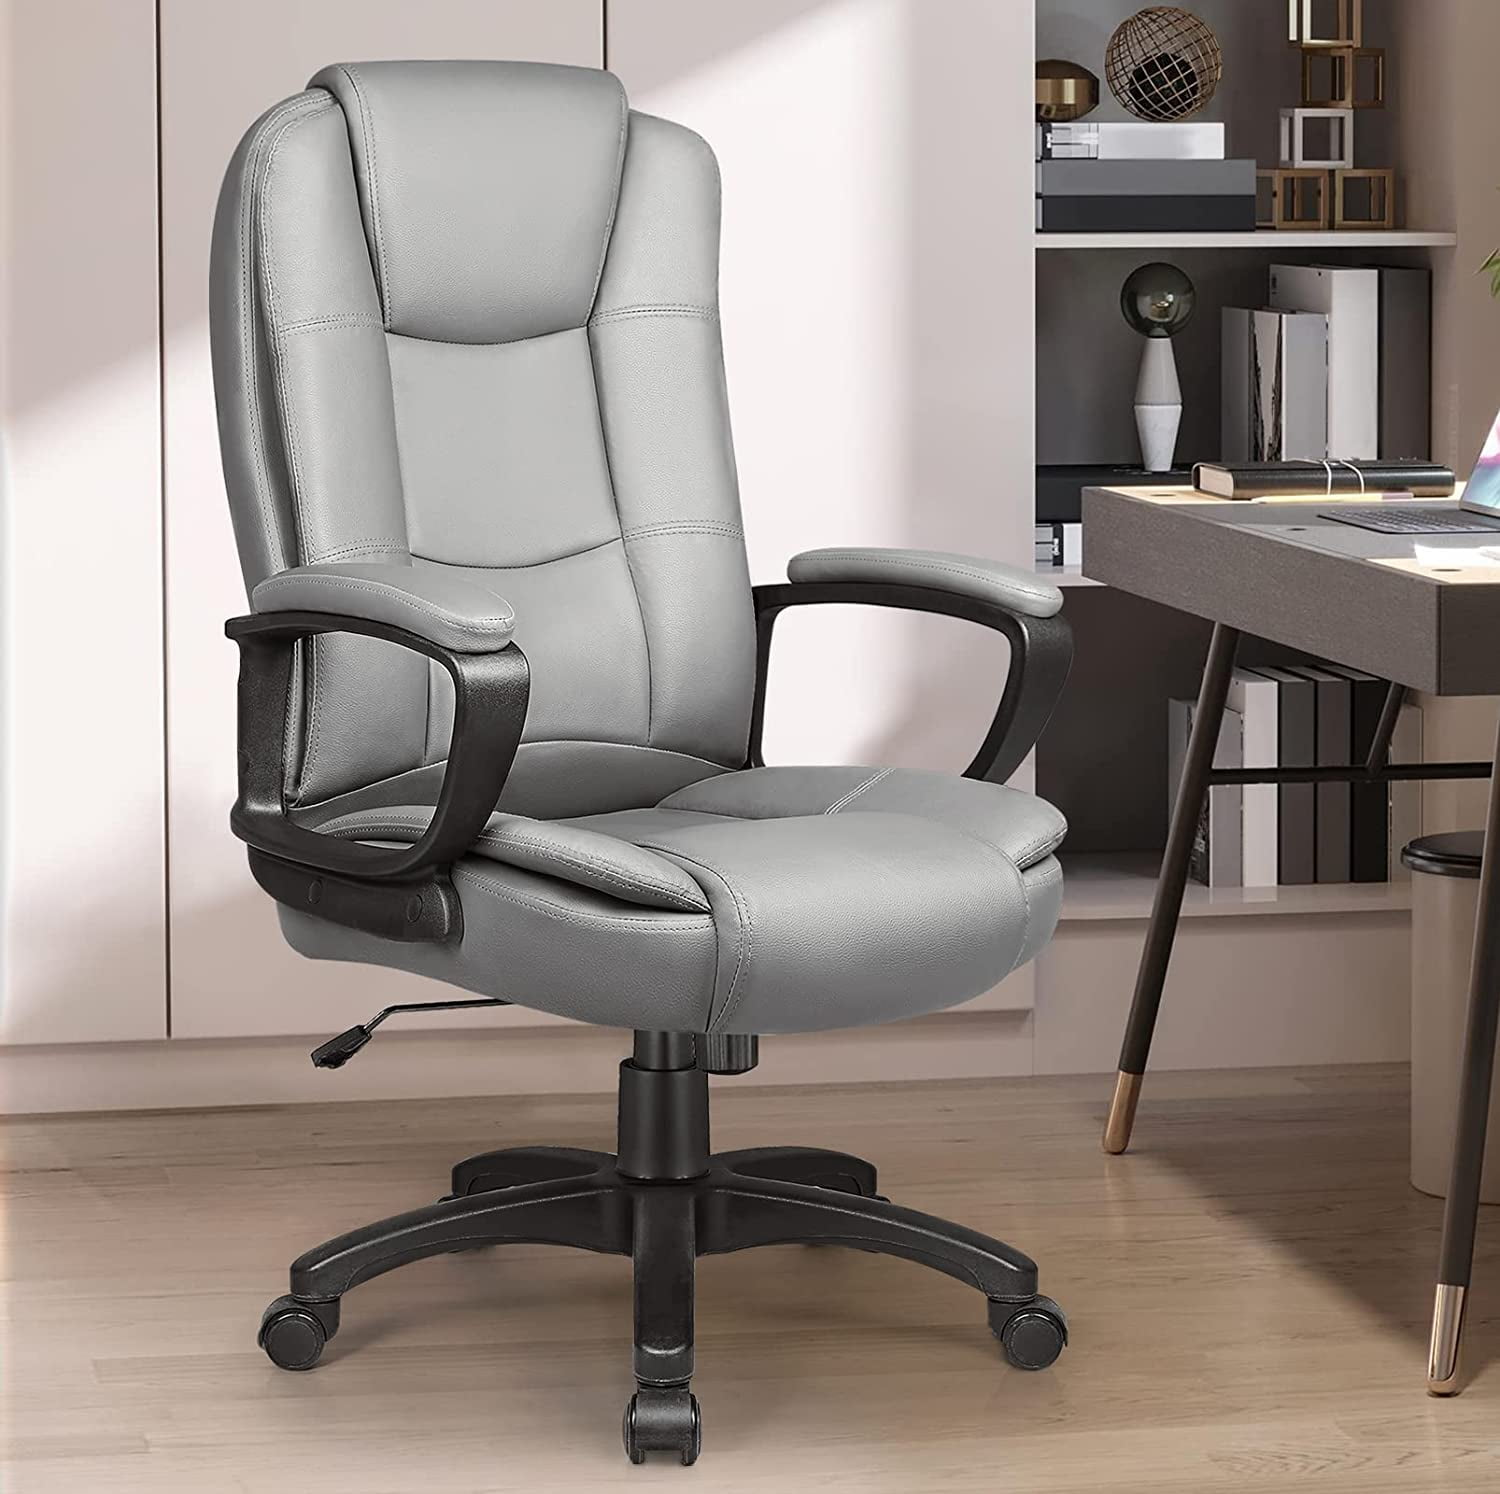 OFIKA Home Office Chair with Spring Cushion,400LBS High Back Executive